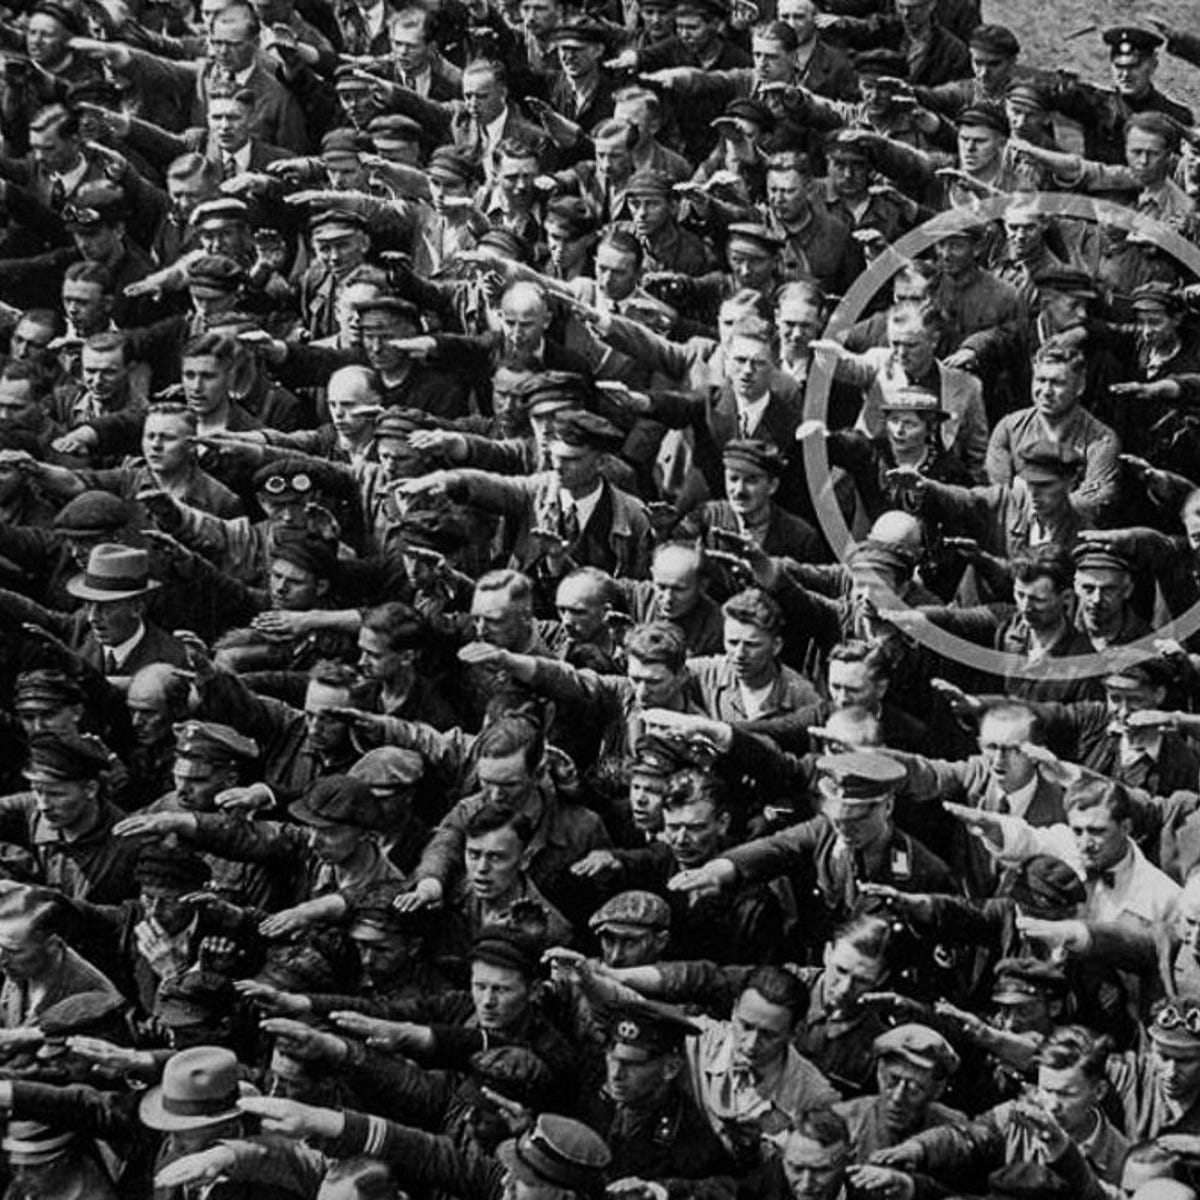 The lone German worker who refused to salute Hitler | Mashable